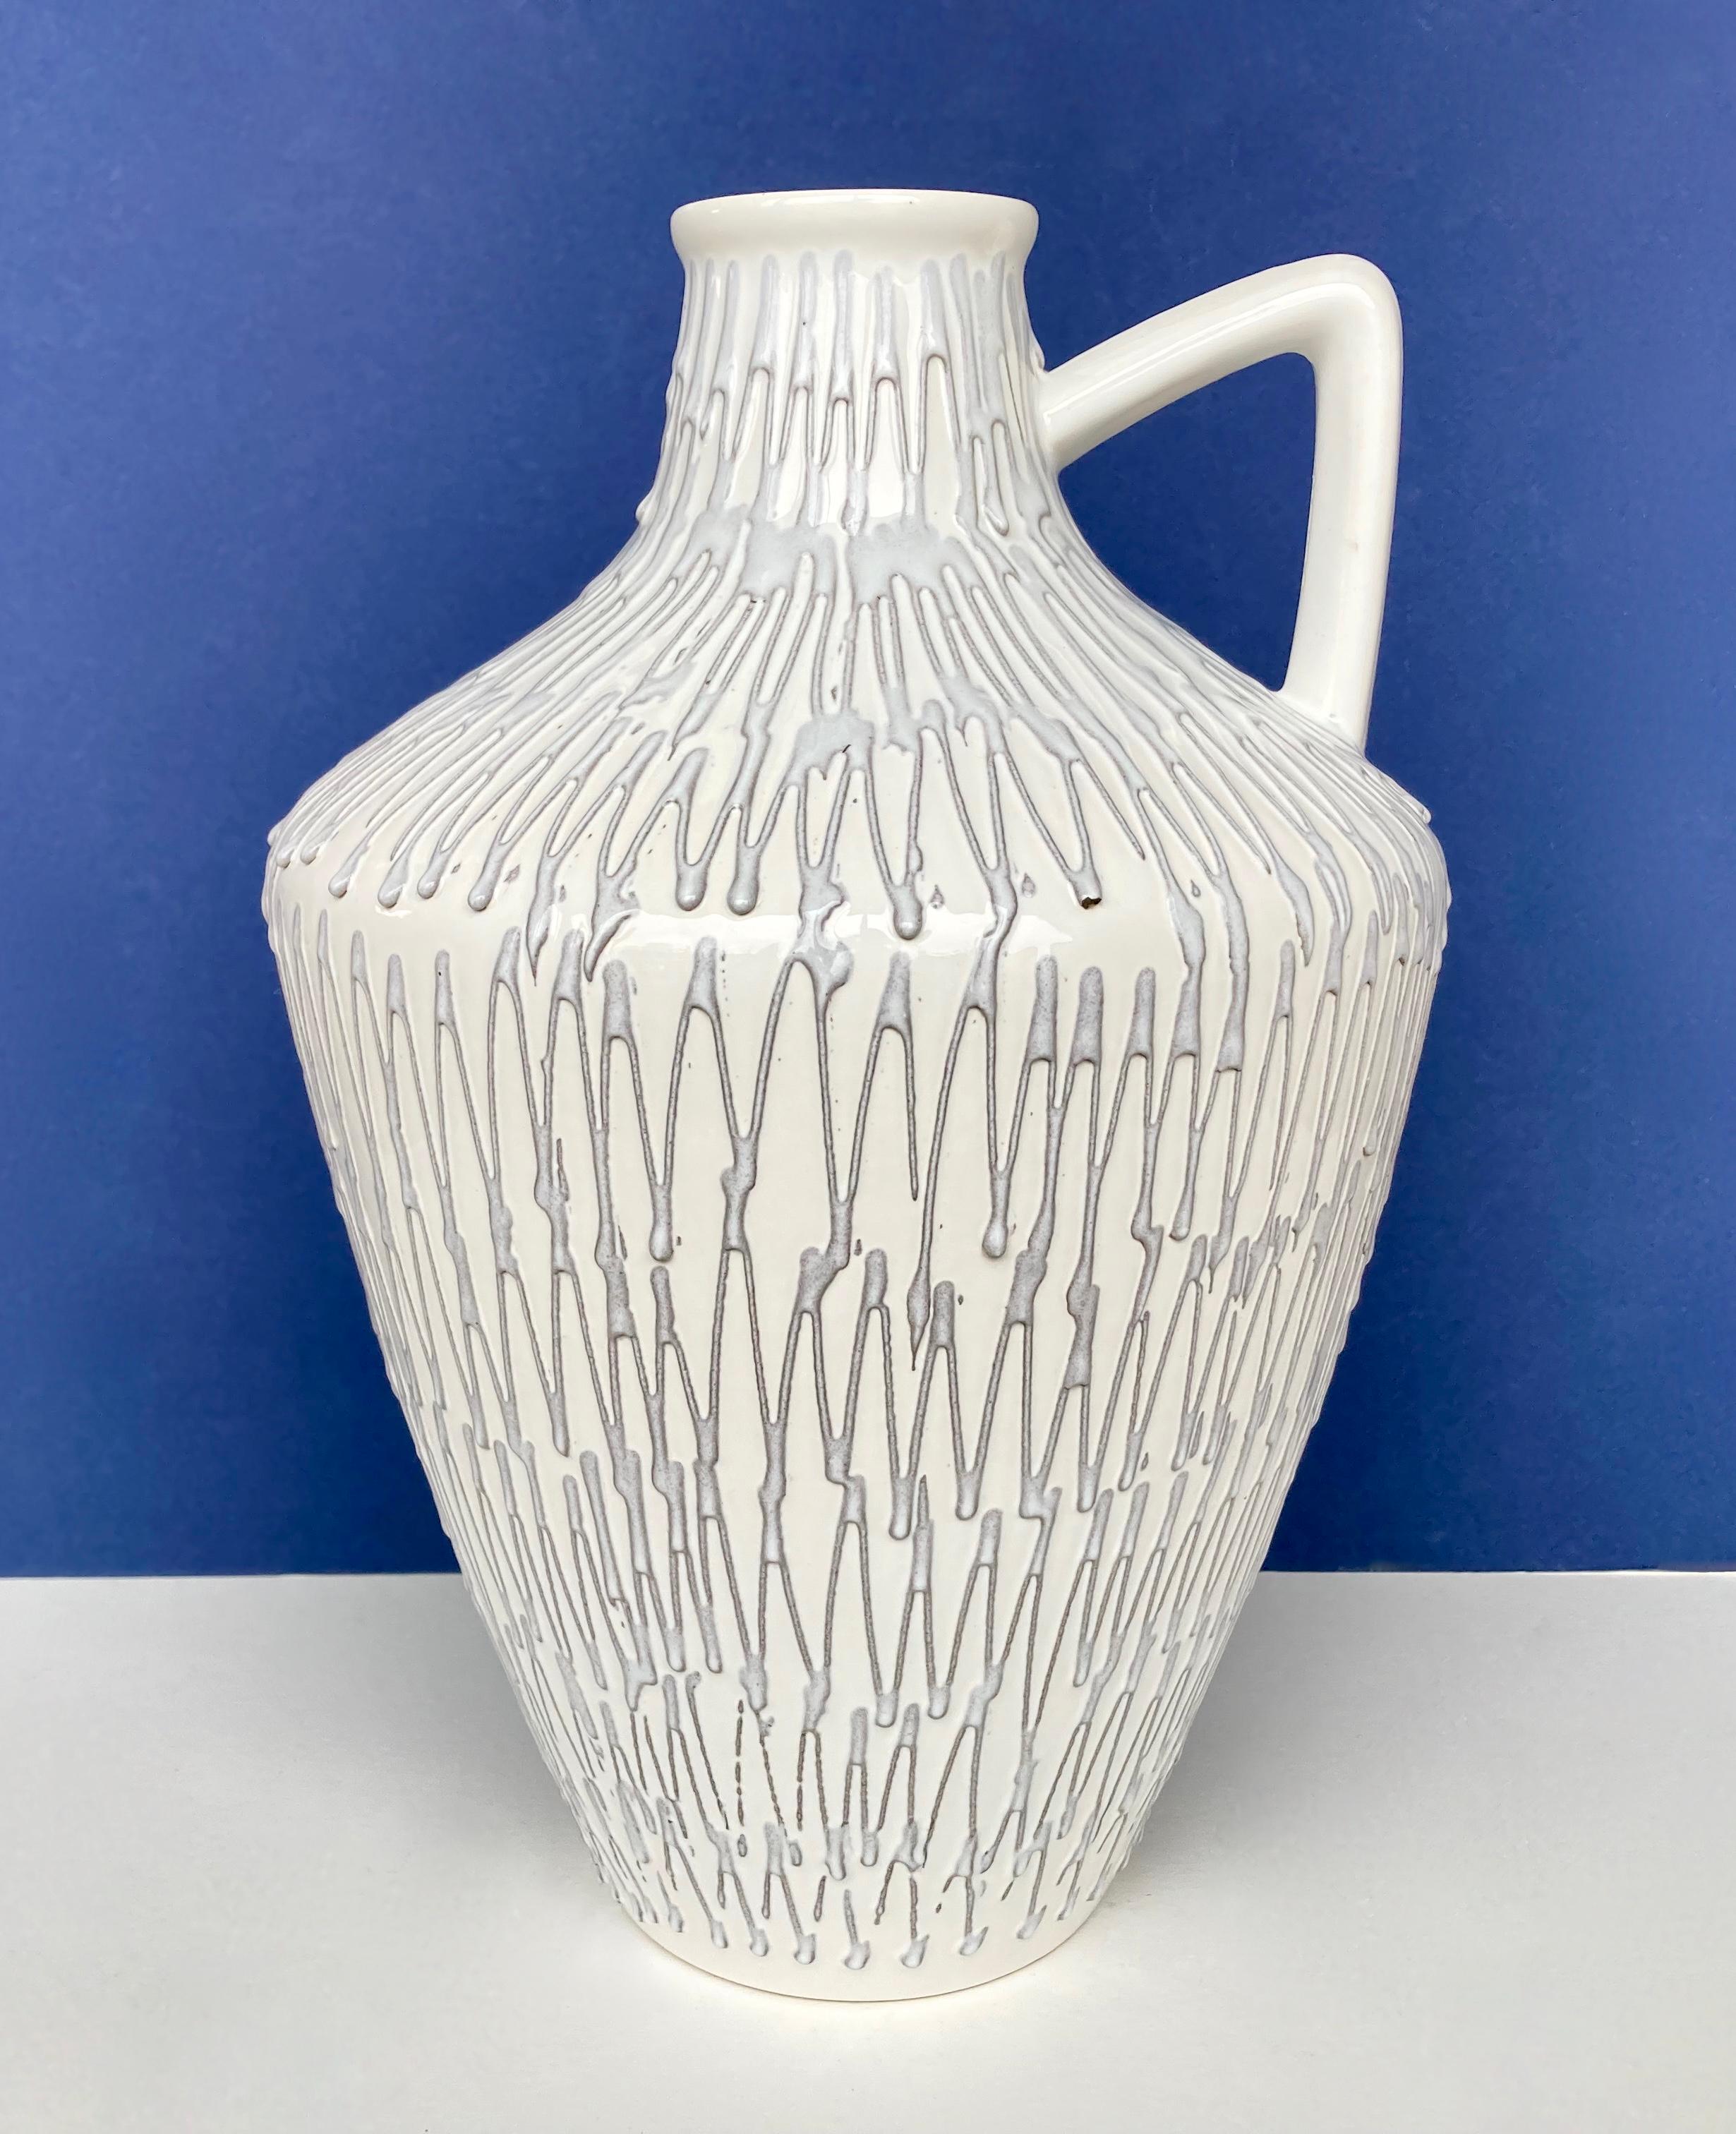 A perfect example of mid-century modern German art pottery. This fat lava vase was made by the west German producer Ilkra Edel Keramik in the late 1950s/early 1960s . Their very distinctive items are designed with extraordinary care which makes them